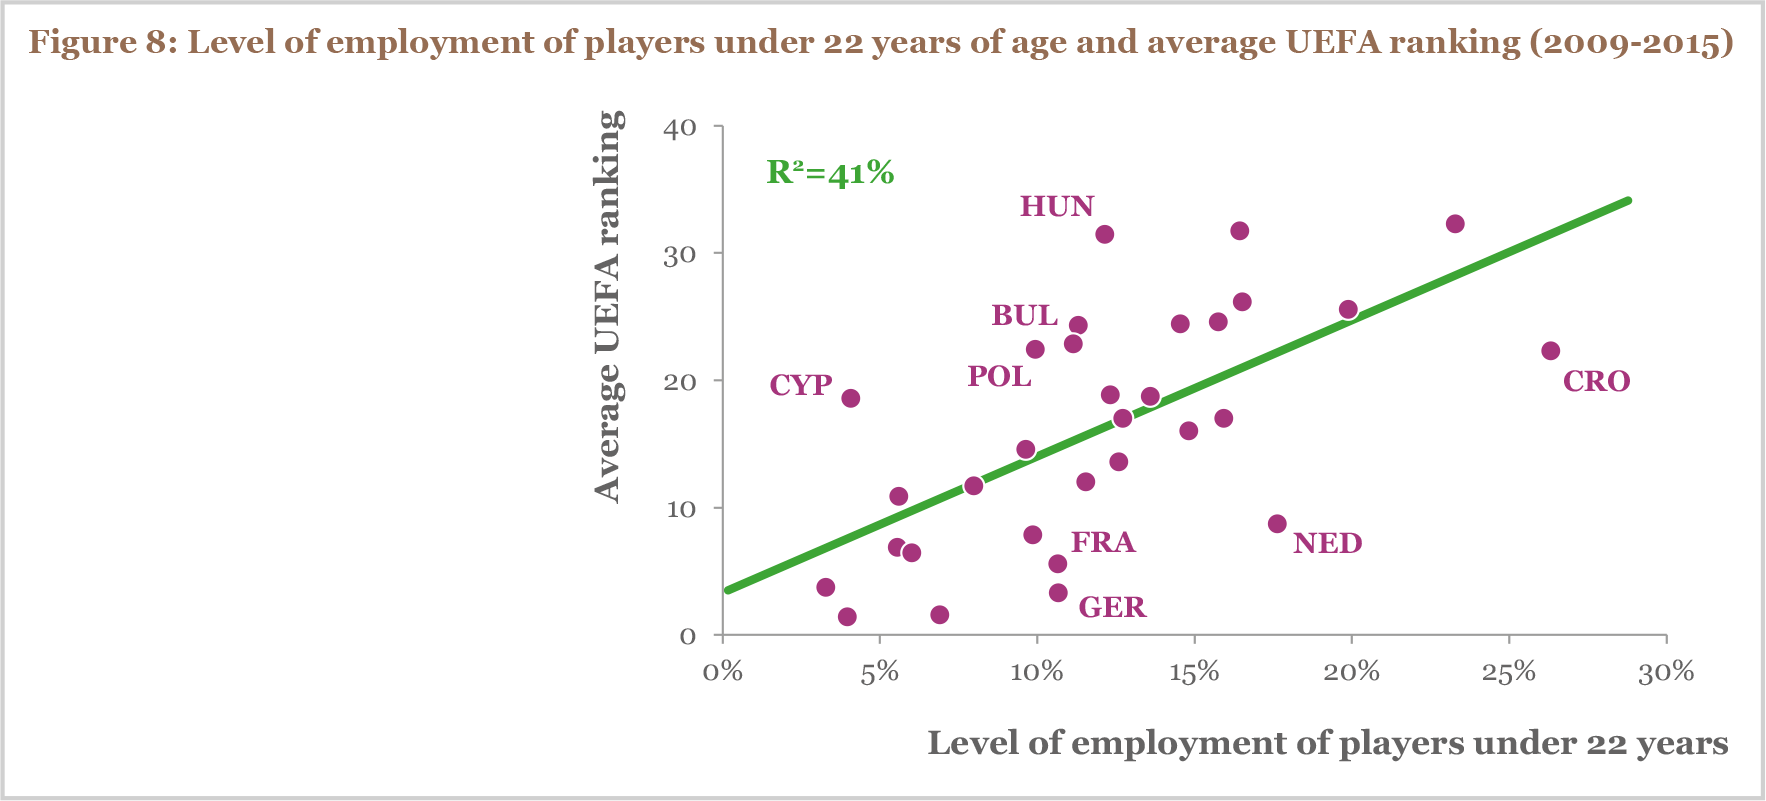 Level of employment of players under 22 years of age and average UEFA ranking (2009-2015)